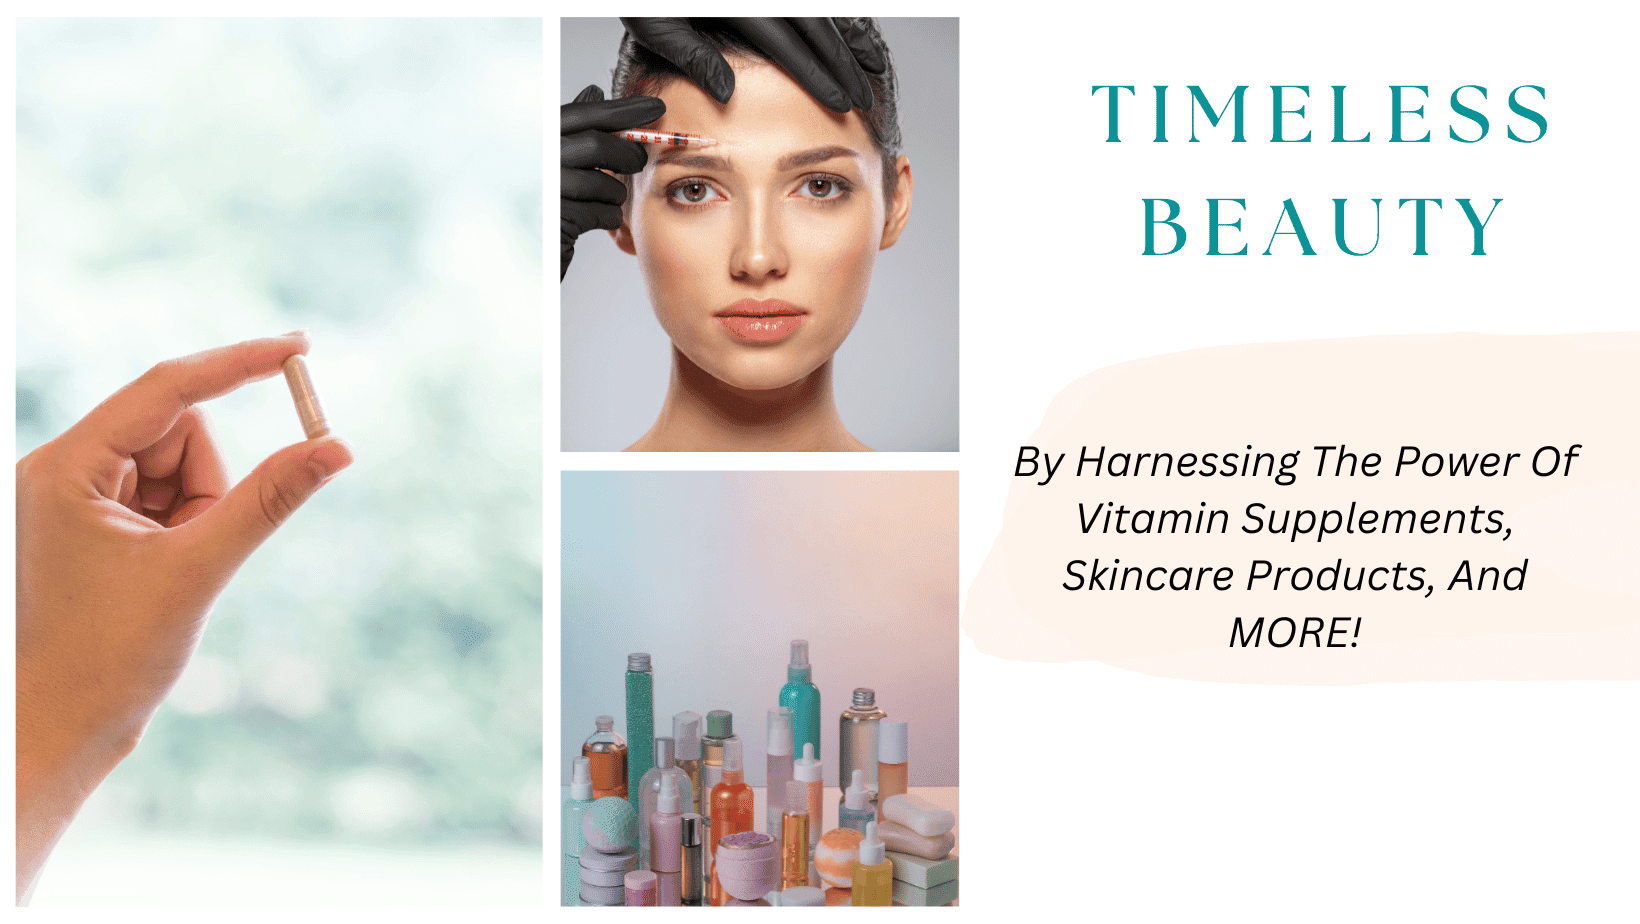 harnessing-the-power-of-vitamin-supplements-and-skincare-for-timeless-beauty-barbies-beauty-bits